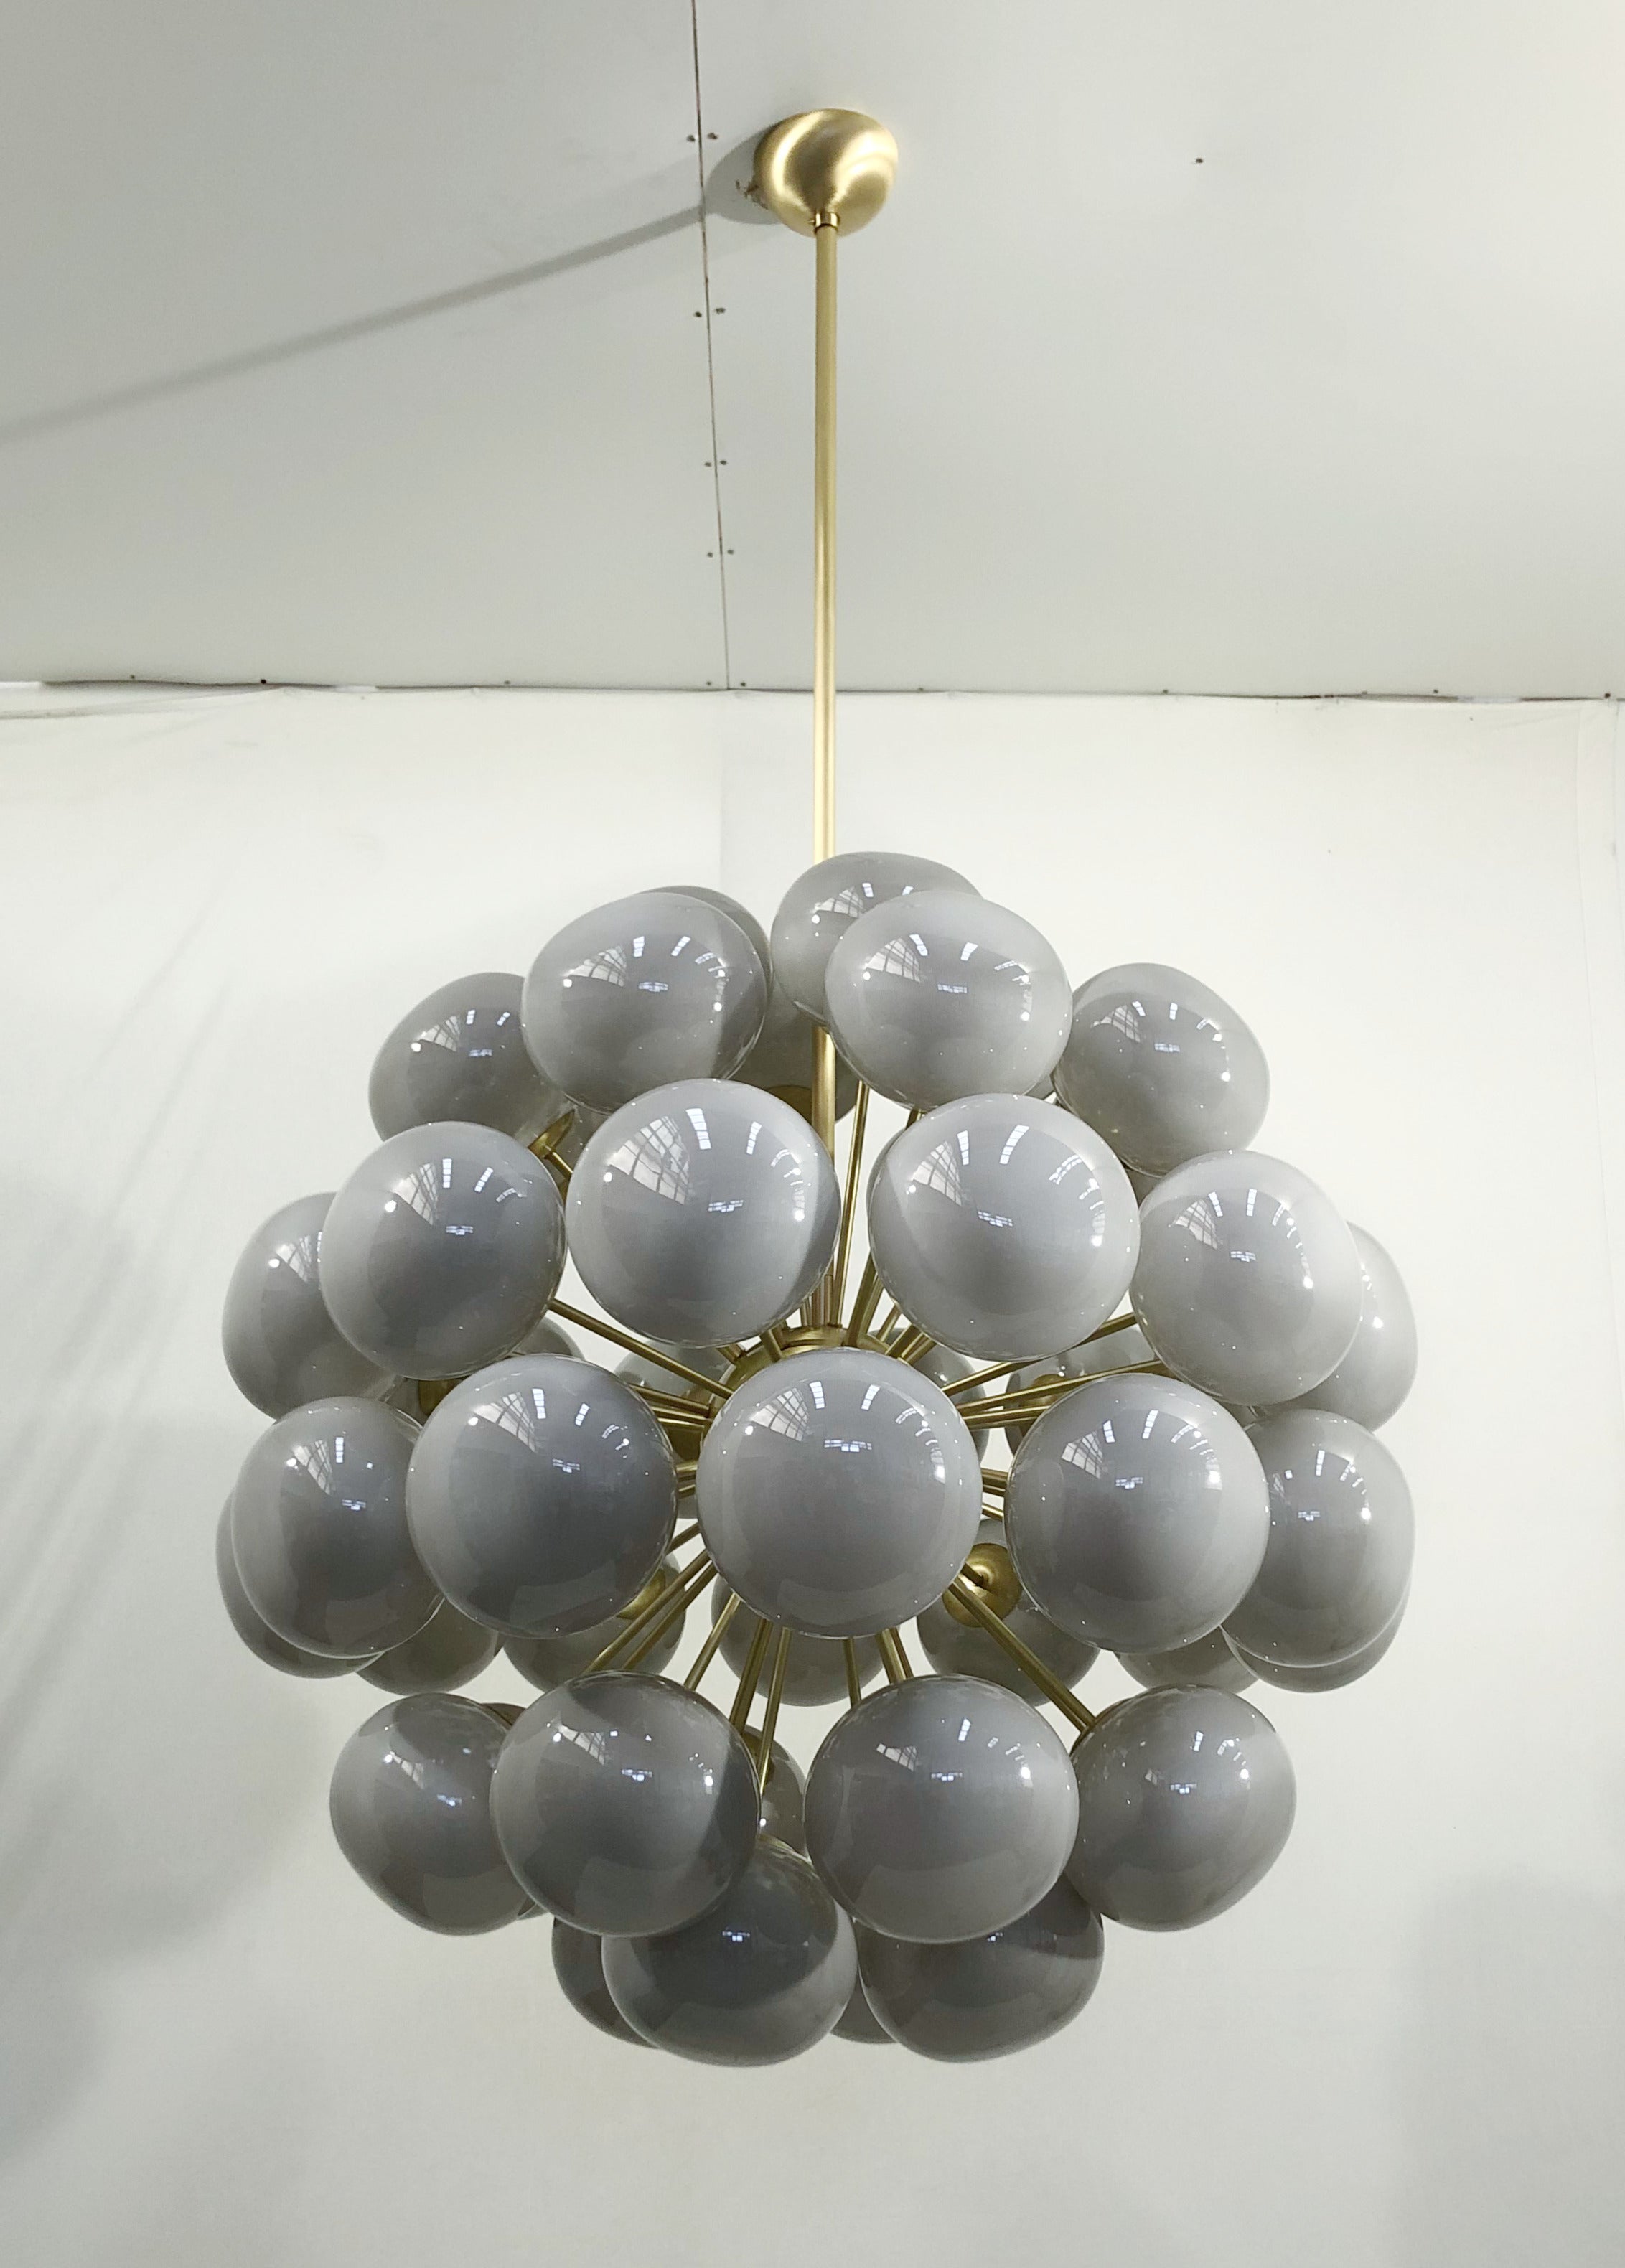 Italian sputnik chandelier with 48 gray Murano pebble glass shades mounted on brass frame / Designed by Fabio Bergomi for Fabio Ltd / Made in Italy
48 lights / E12 or E14 type / max 40W each
Measures: Diameter 38 inches, height 38 inches plus rod